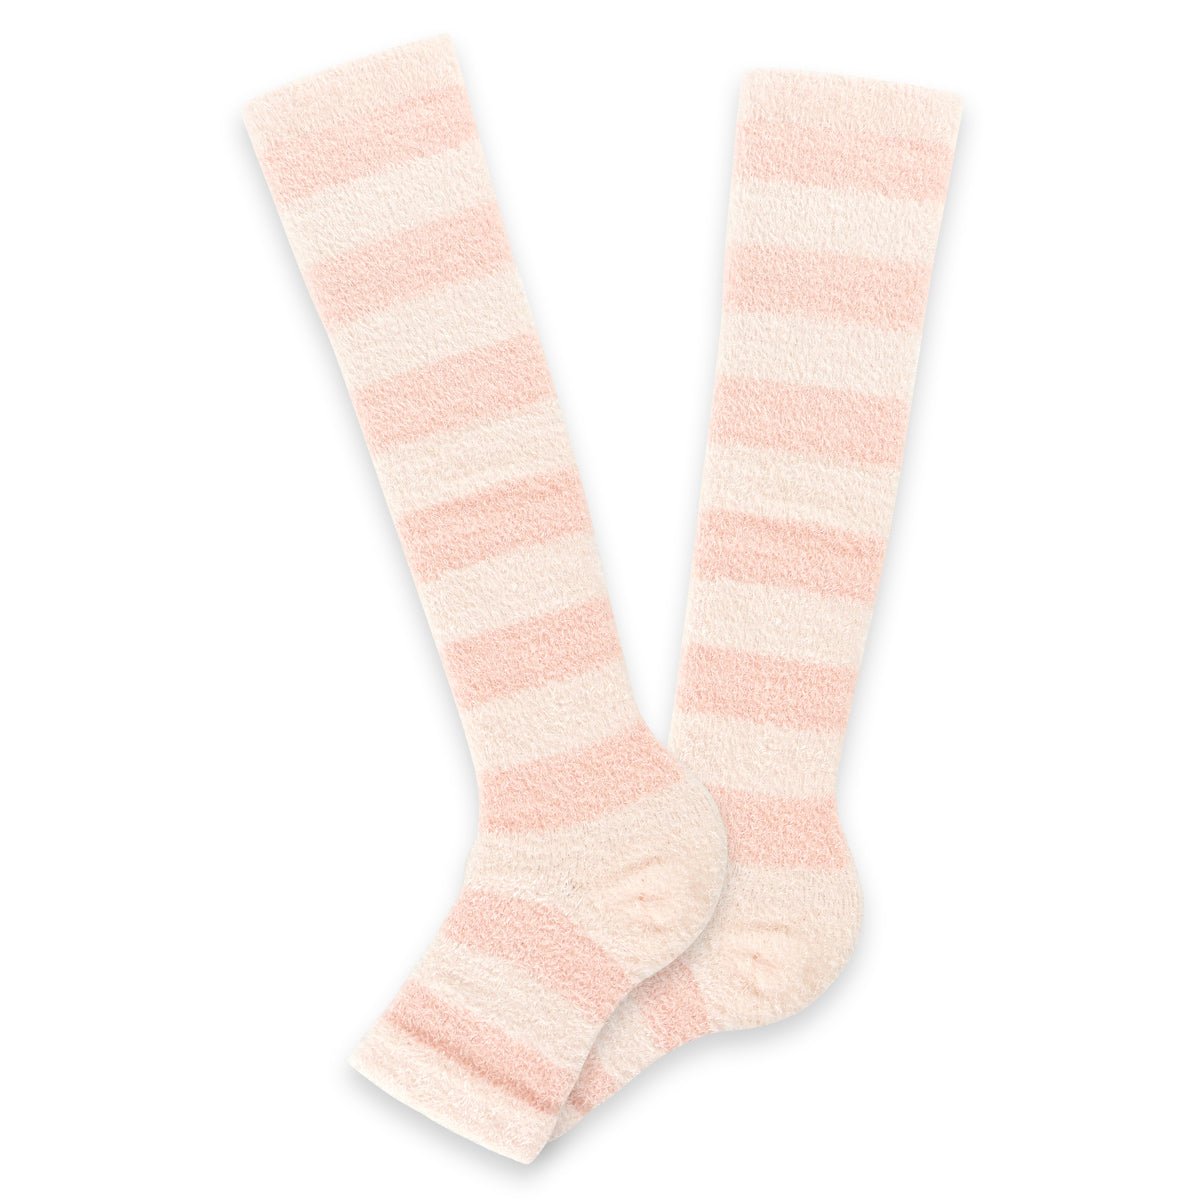 Refreshing Toeless Compression Socks | Knee-high | Pink - CHERRYSTONE by MARKET TO JAPAN LLC